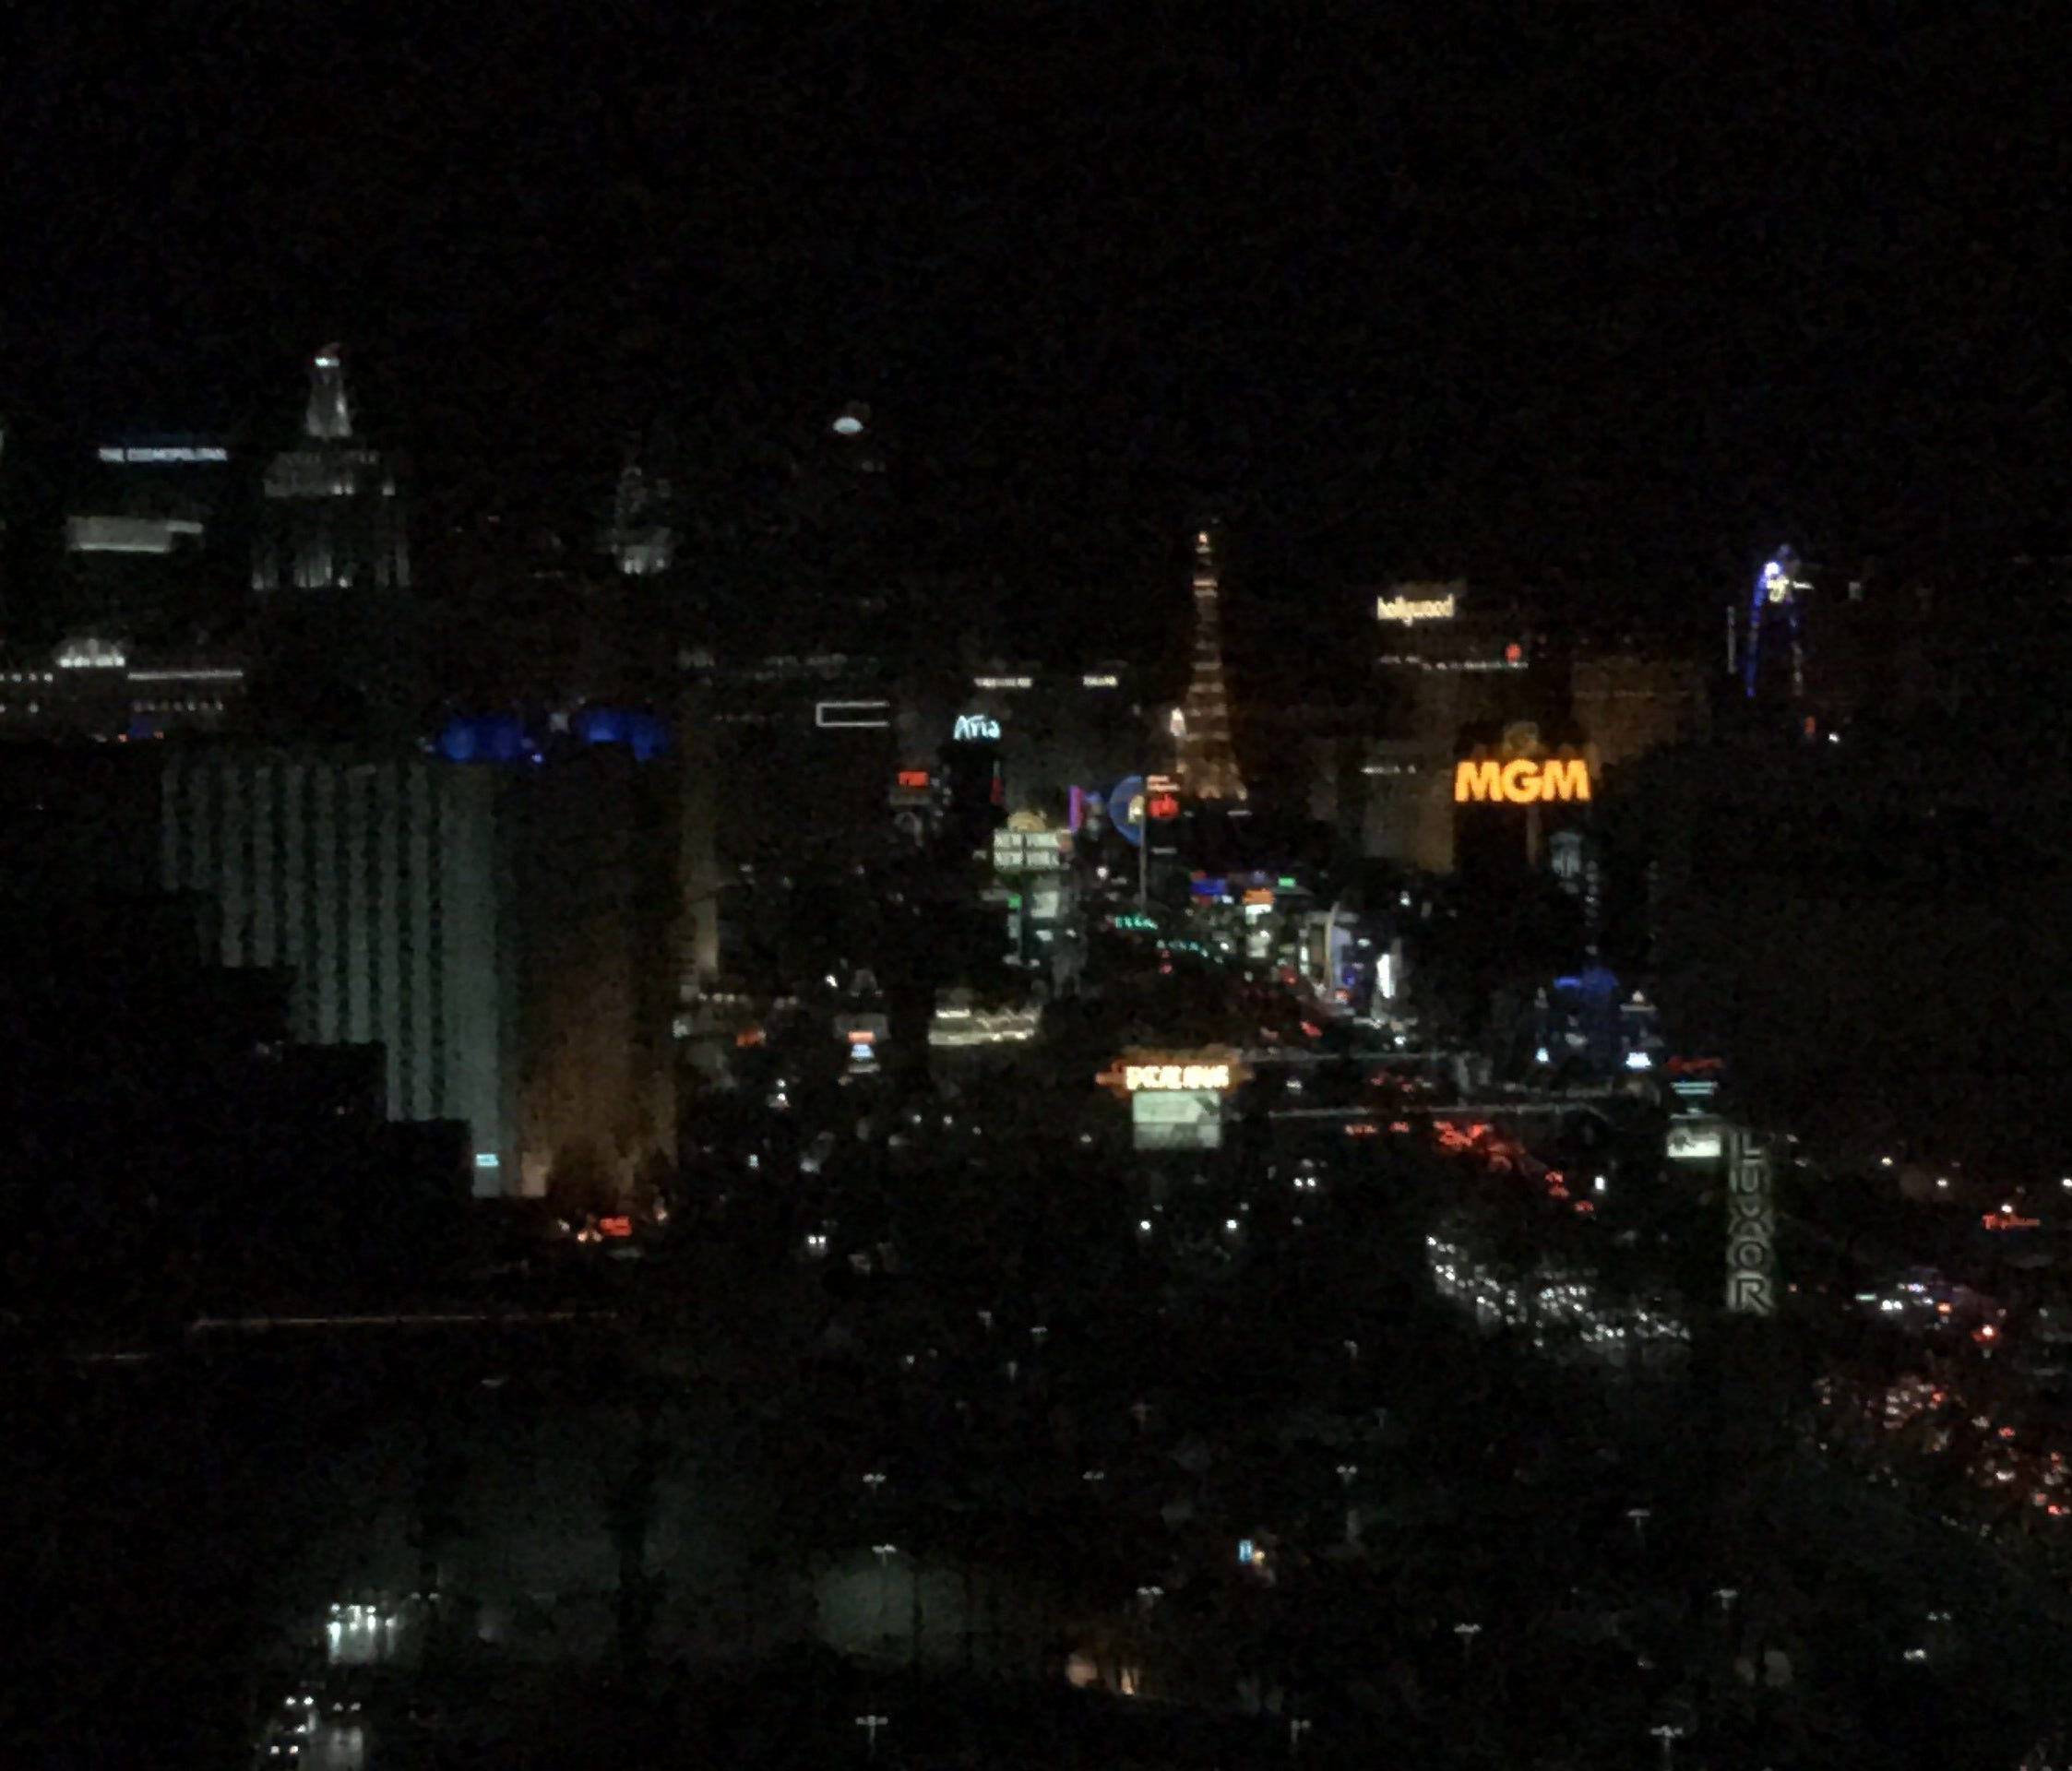 One week to the minute after shooting started, casinos along the Las Vegas Strip went dark in honor of the 58 victims of the deadliest mass shooting in modern American history.